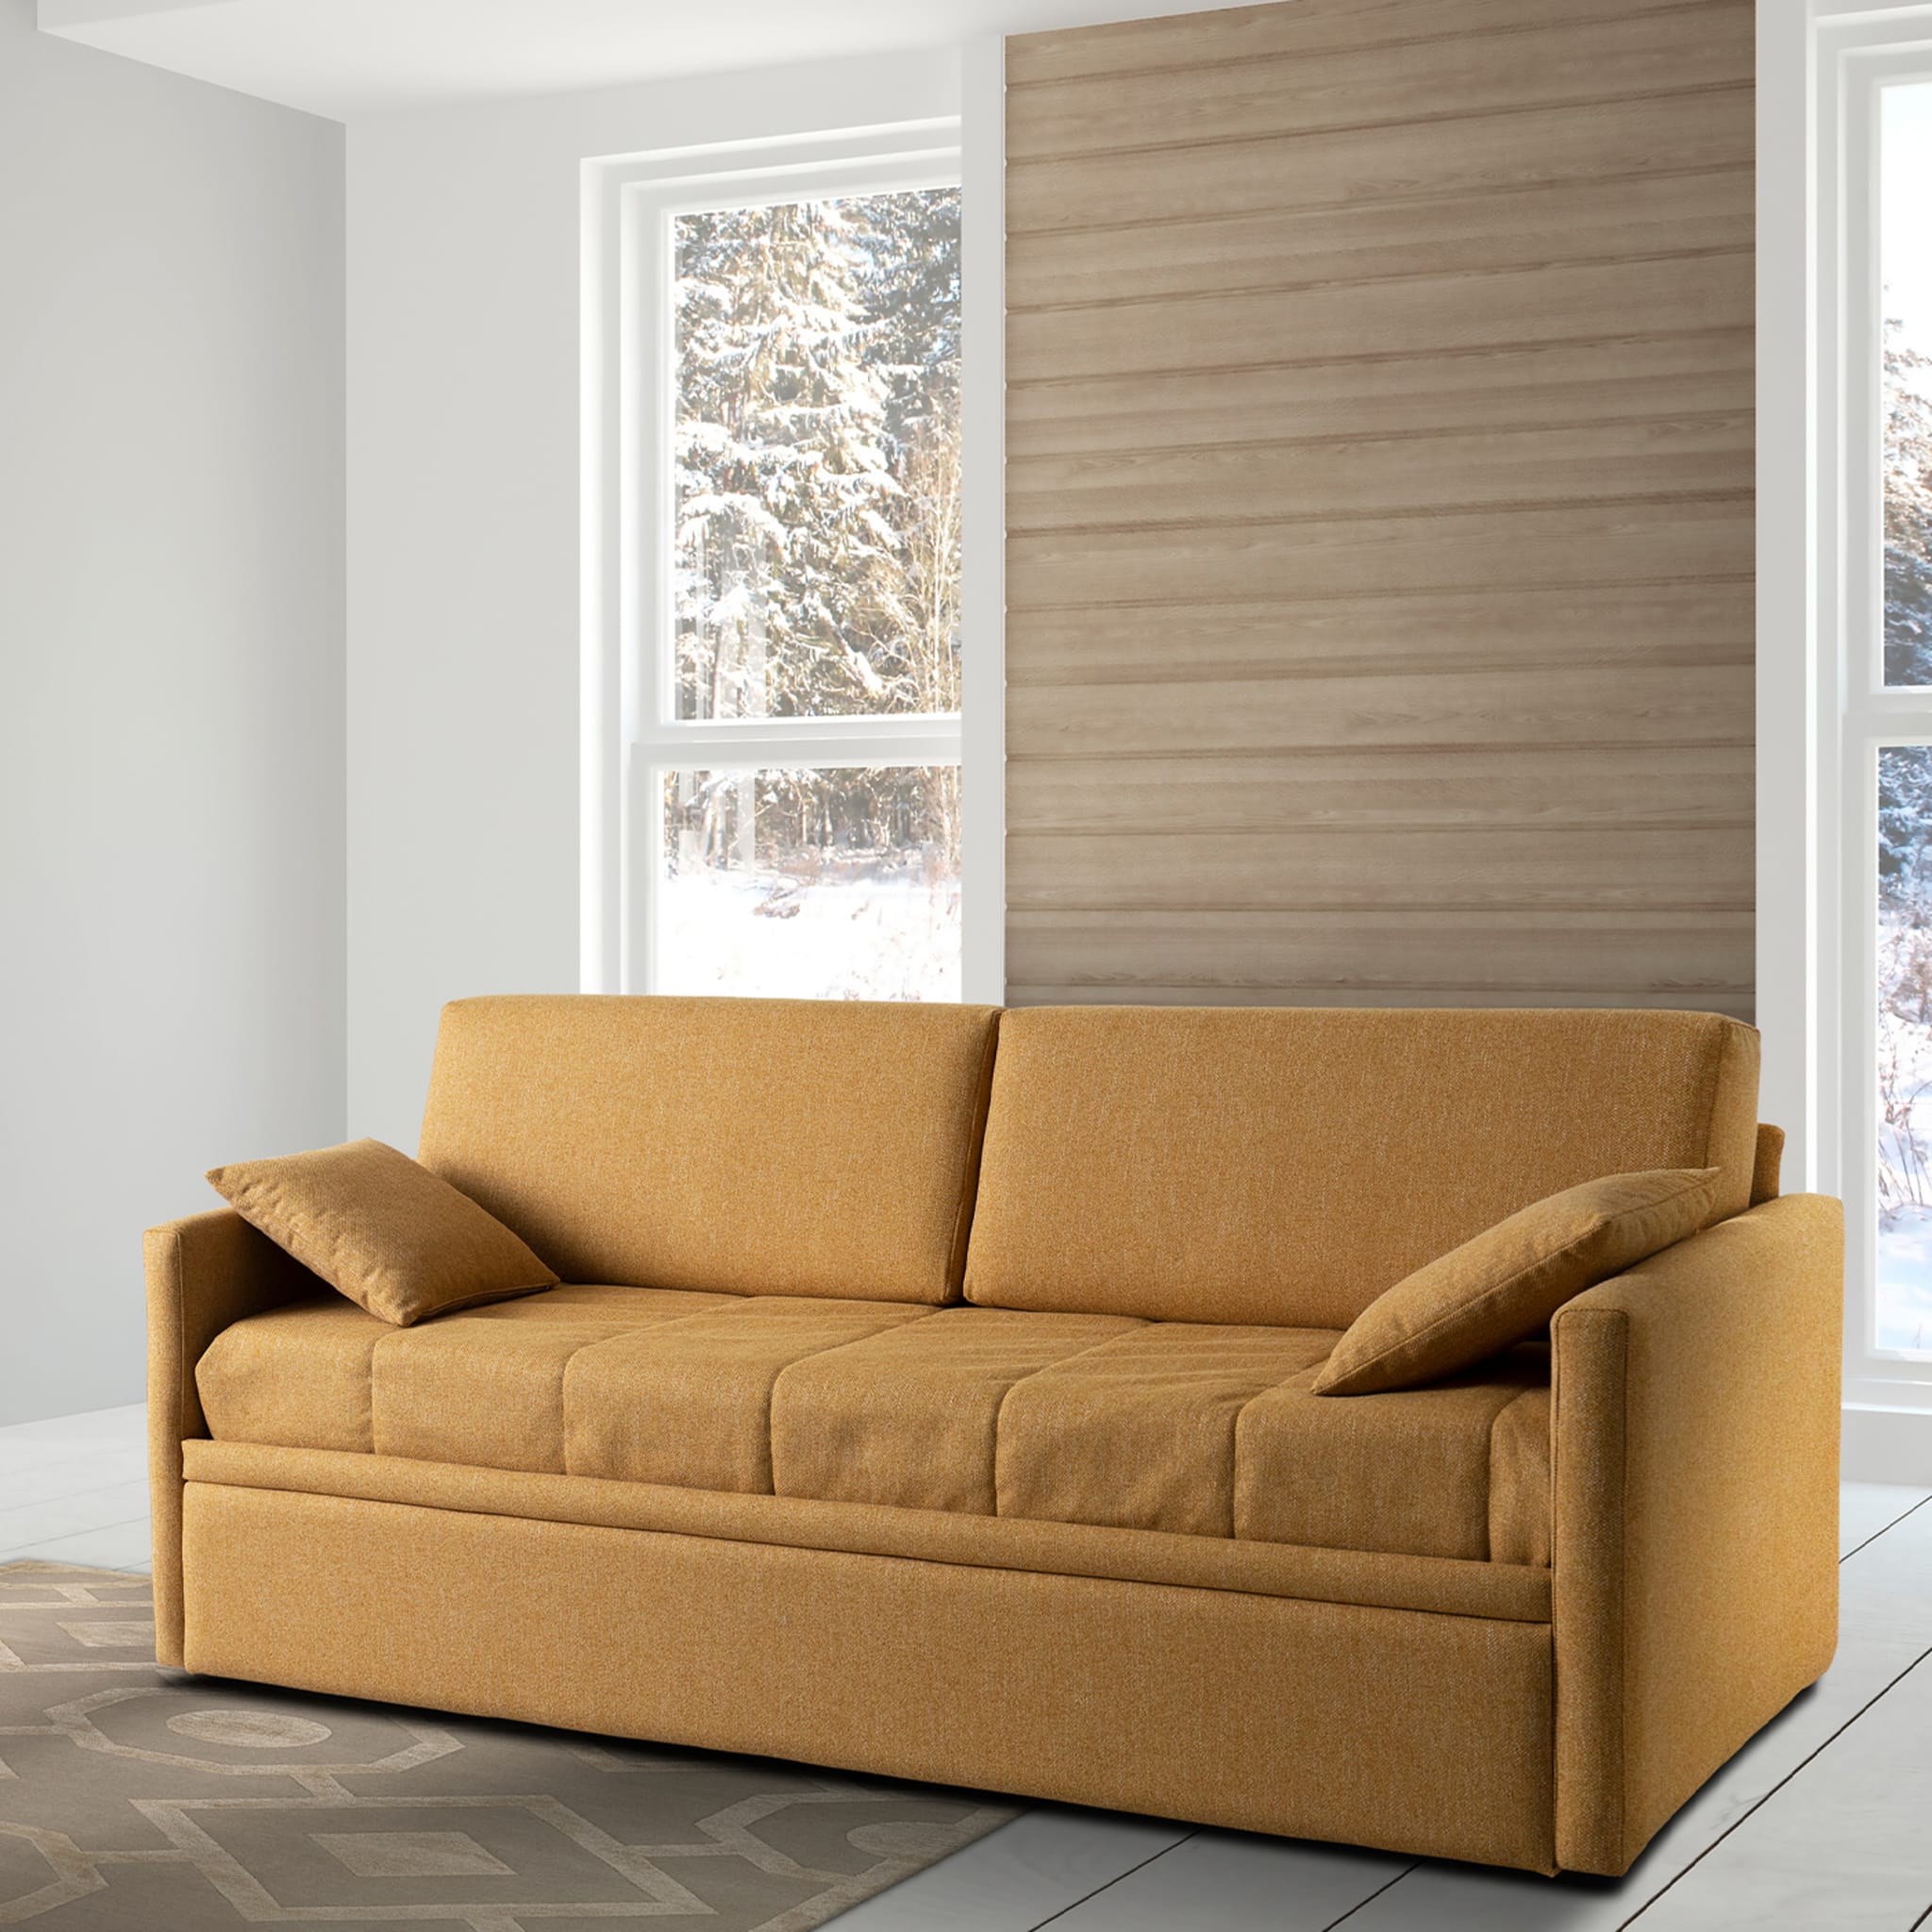 Giselle Mustard Double Sofa Bed - Alternative view 1